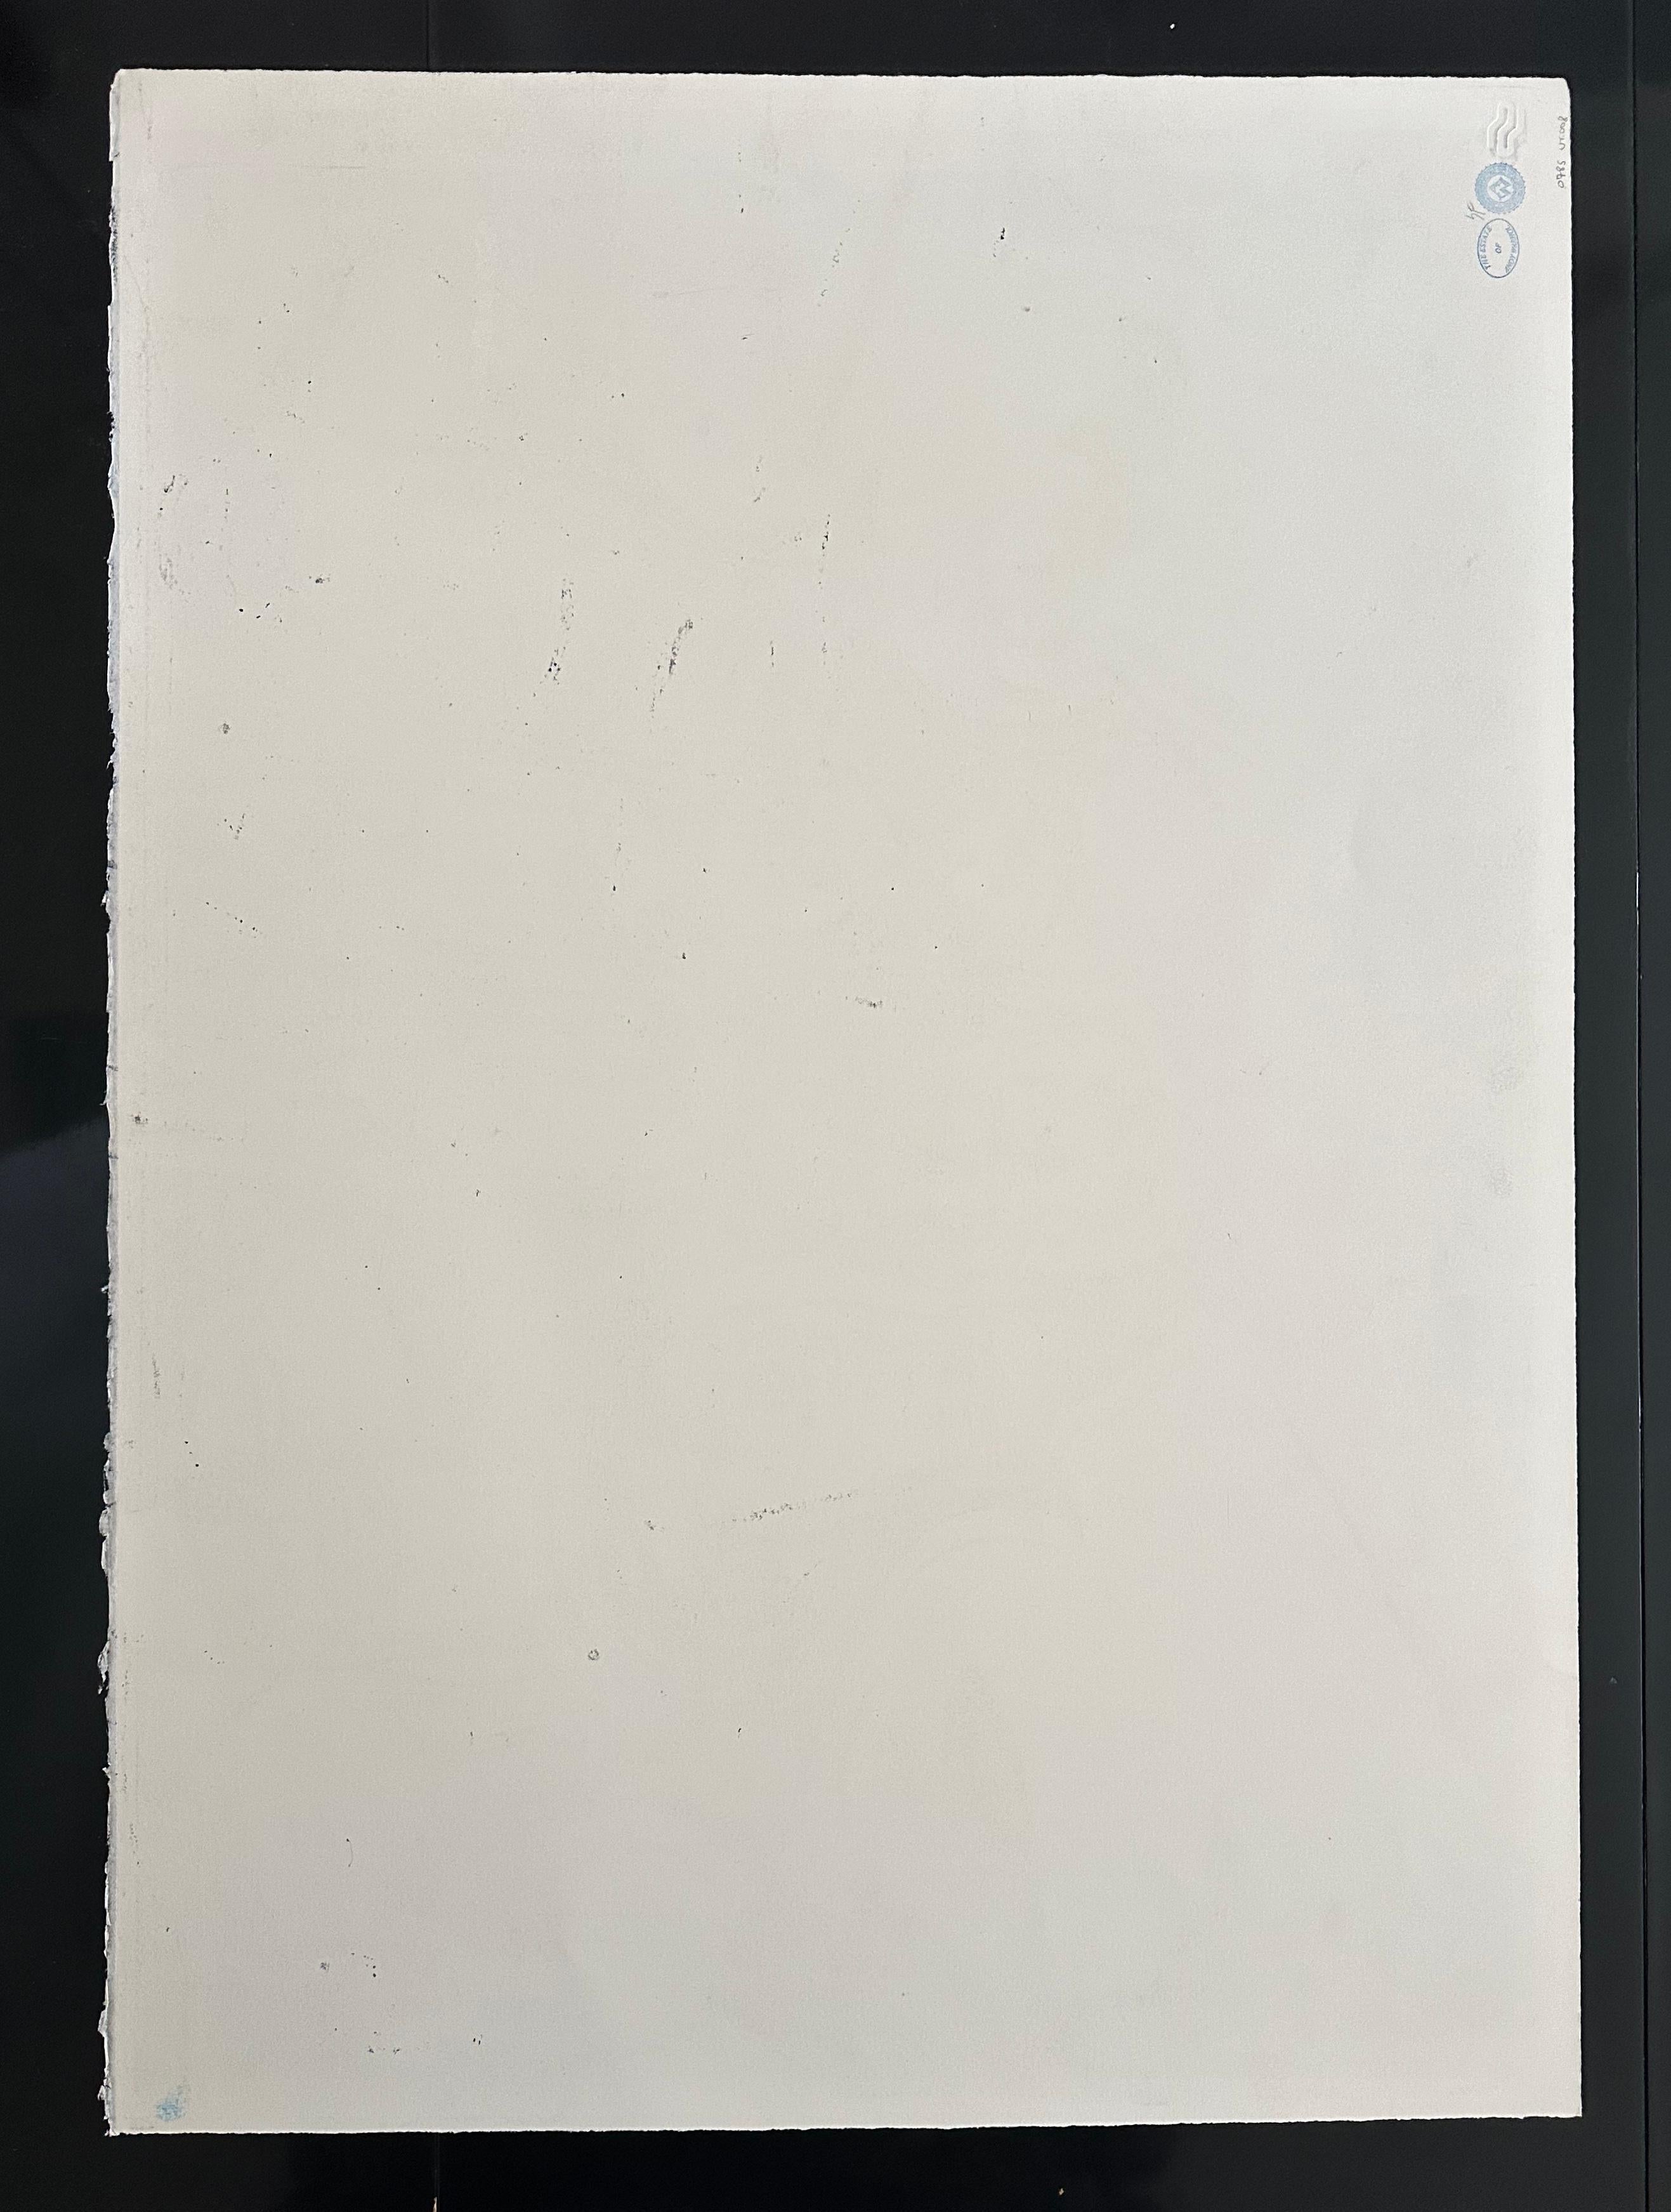 Work comes with a Certificate of Provenance issued by Christie's.

Stamped on the verso by the Estate of the Artist and The Andy Warhol Foundation for the Visual Arts. Foundation number also written on verso

Provenance: From the Estate of the